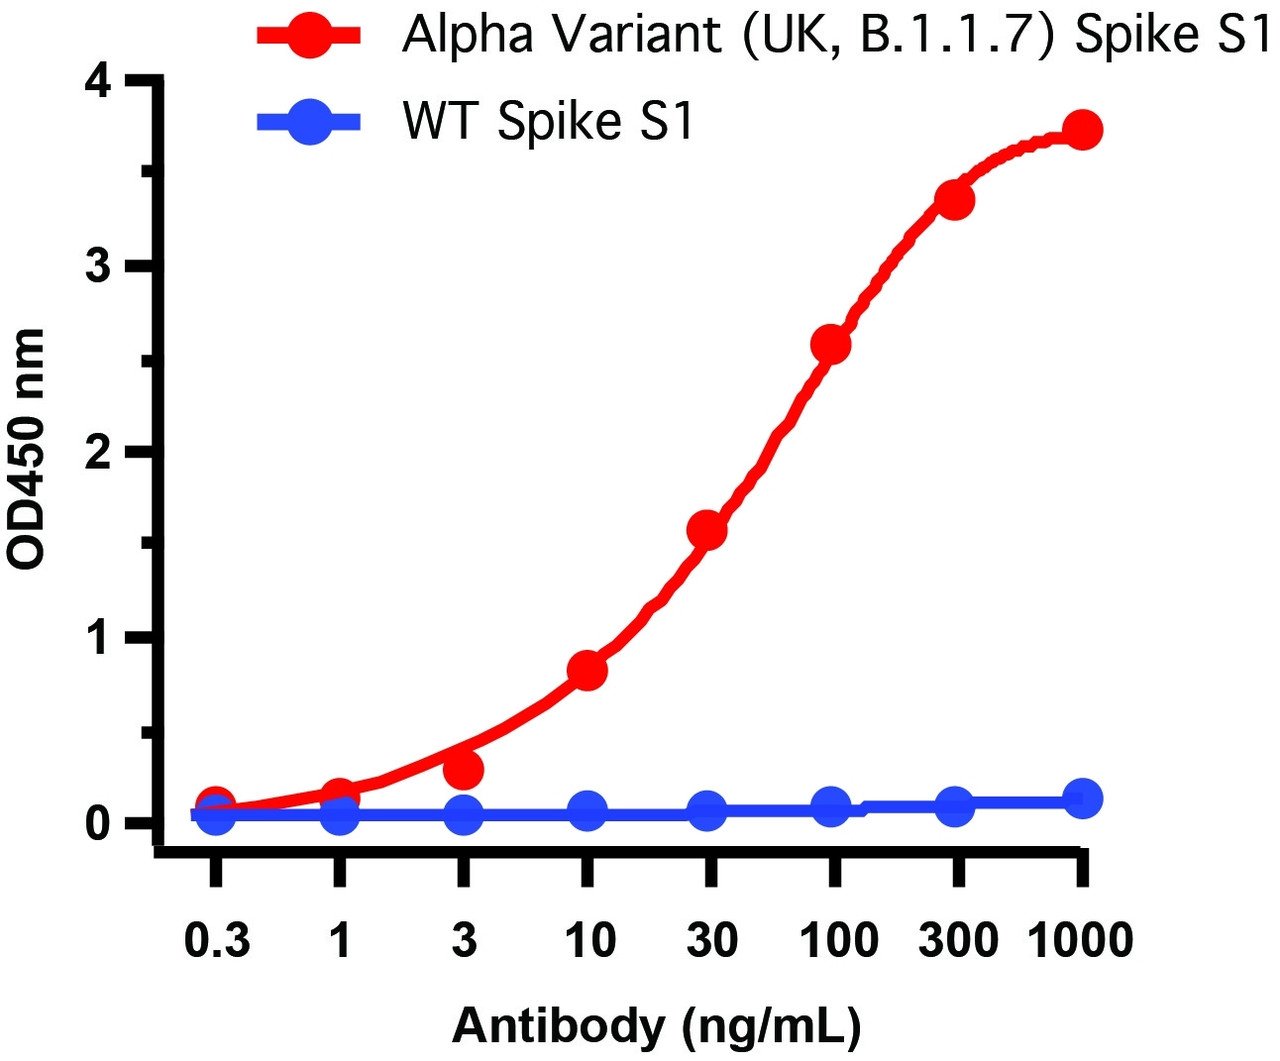 Figure 2 ELISA Validation of P681H Mutant Specific Spike Antibodies with SARS-CoV-2 Alpha Variant Spike S1 Protein 
Coating Antigen: SARS-CoV-2 spike S1 proteins, including WT and alpha variant (B.1.1.7, UK) , 1 ug/mL, incubate at 4 &#730;C overnight.
Detection Antibodies: SARS-CoV-2 Alpha Variant Spike antibody, PM-9371, dilution: 0.3-1000 ng/mL, incubate at RT for 1 hr.
Secondary Antibodies: Goat anti-mouse HRP at 1:5, 000, incubate at RT for 1 hr.
SARS-CoV-2 P681H Mutant Specific Spike antibody (PM-9371) can specifically detect alpha variant spike S1 protein, but not WT spike S1 protein (10-300) by ELISA. </strong>